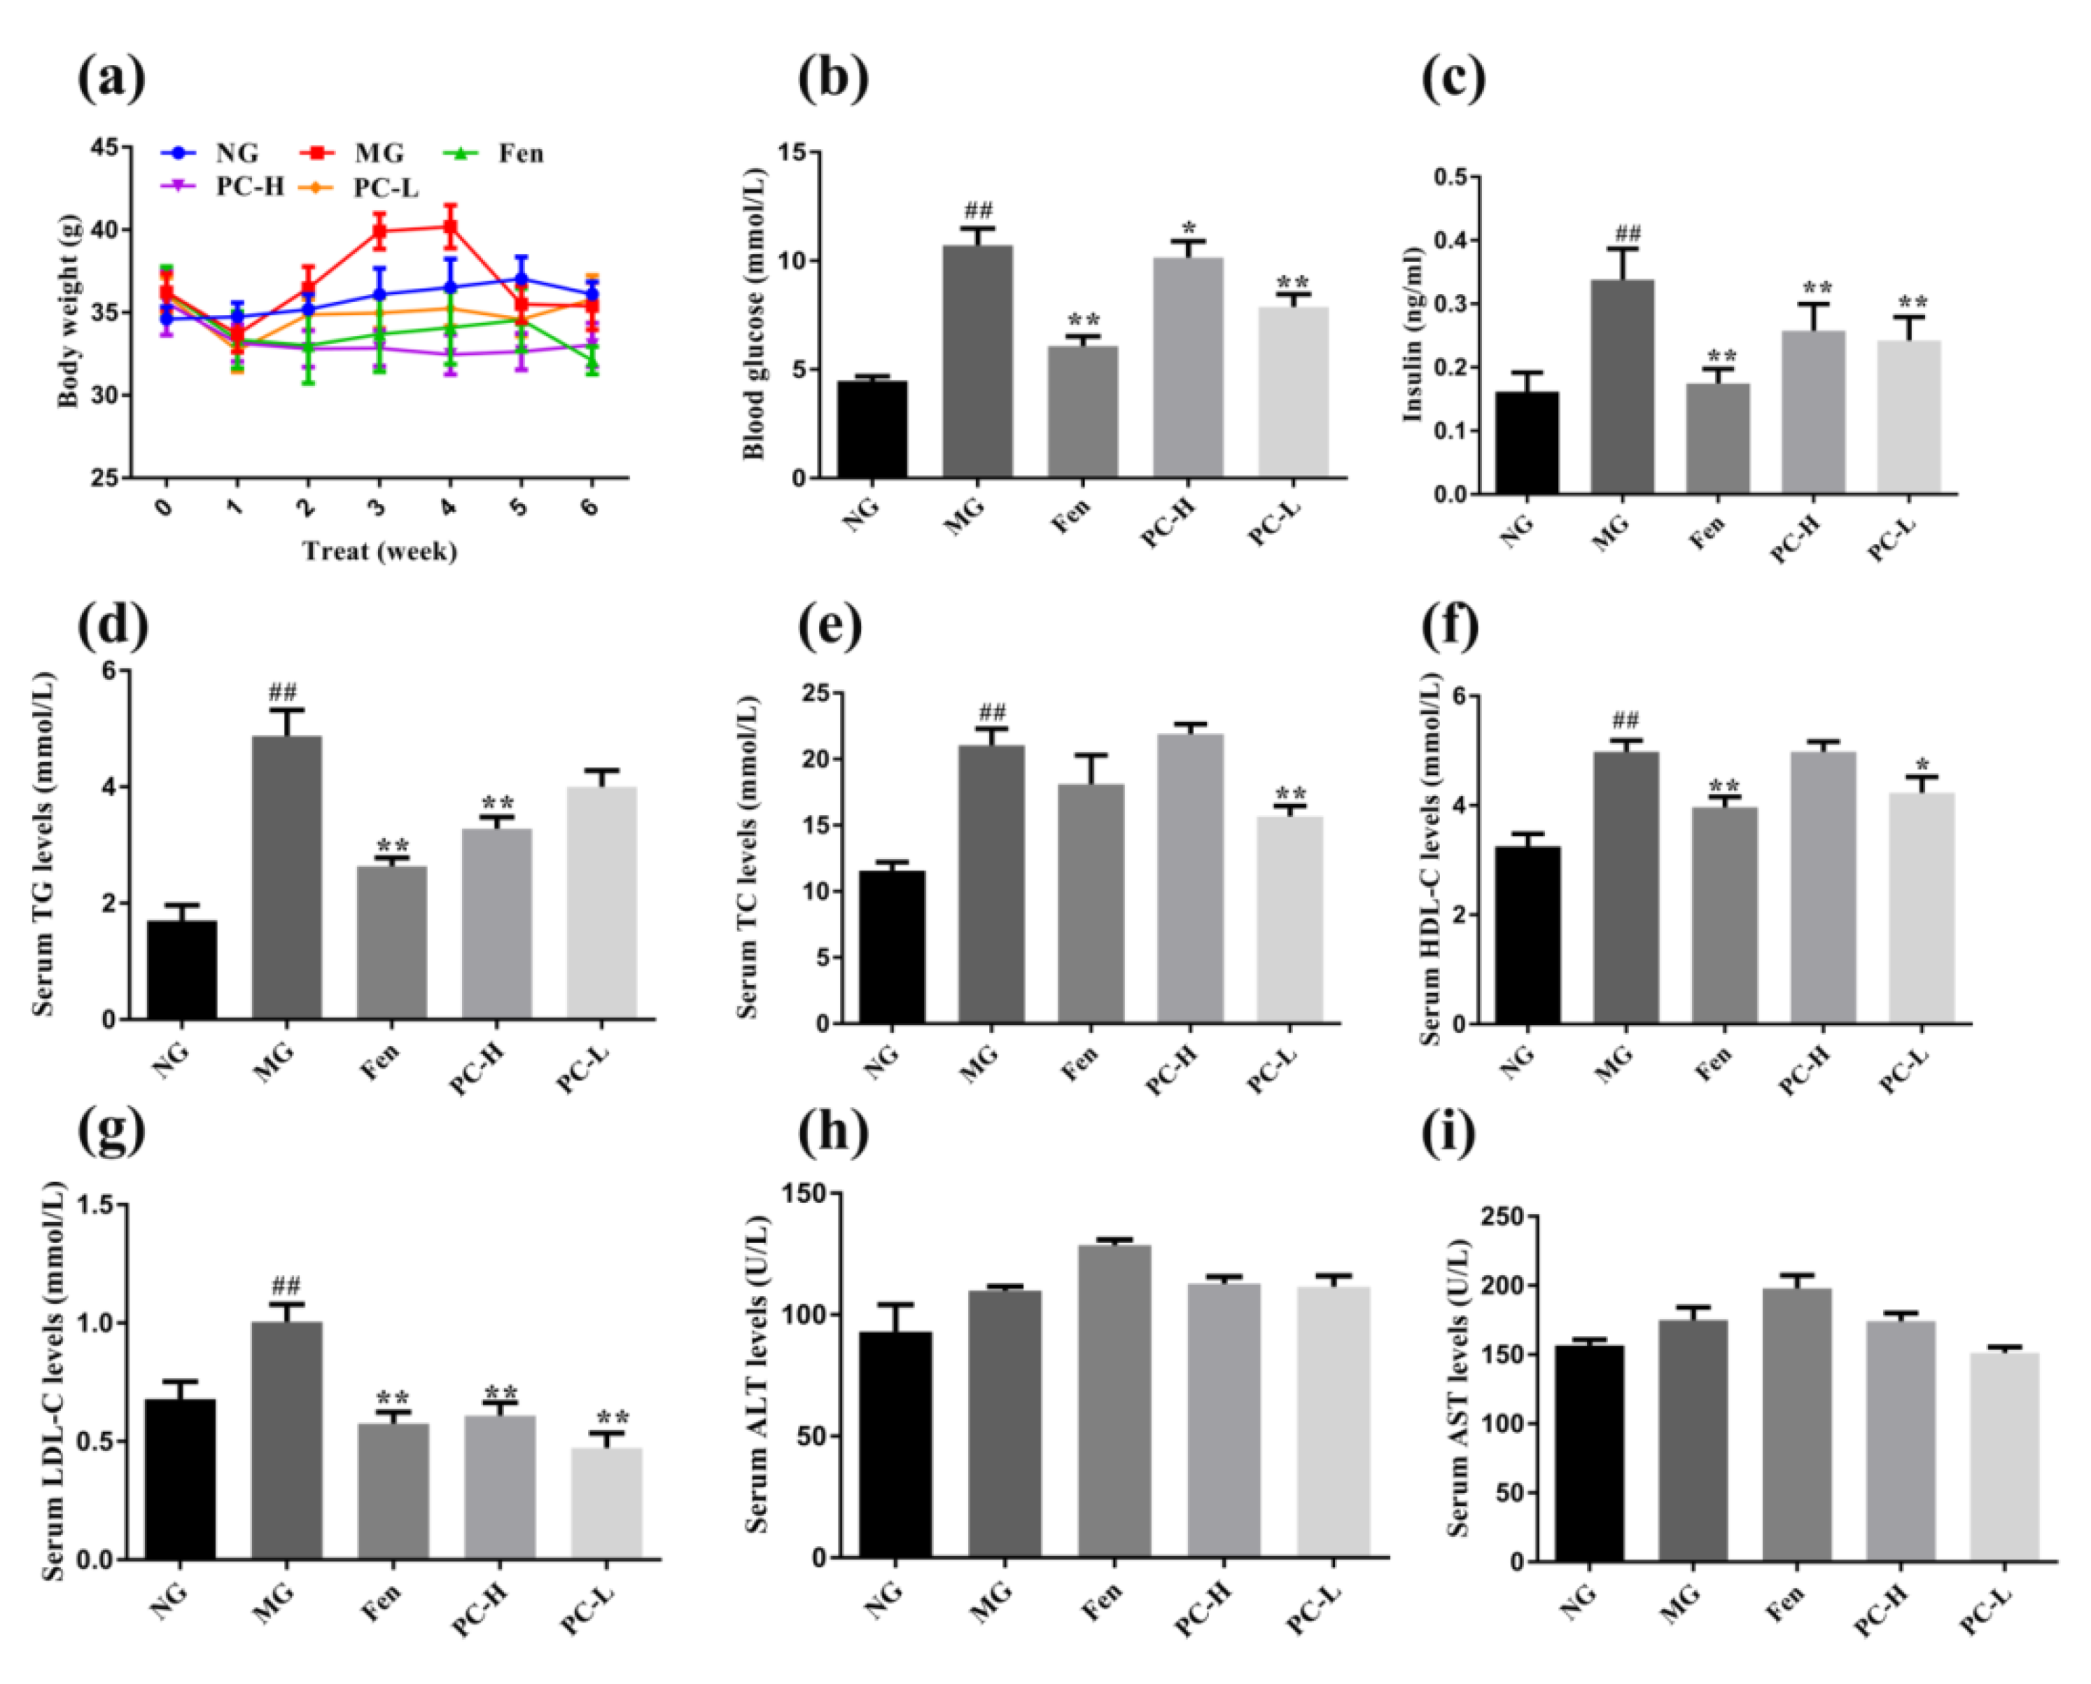 Ijms Free Full Text Proanthocyanidins Ameliorated Deficits Of Lipid Metabolism In Type 2 Diabetes Mellitus Via Inhibiting Adipogenesis And Improving Mitochondrial Function Html